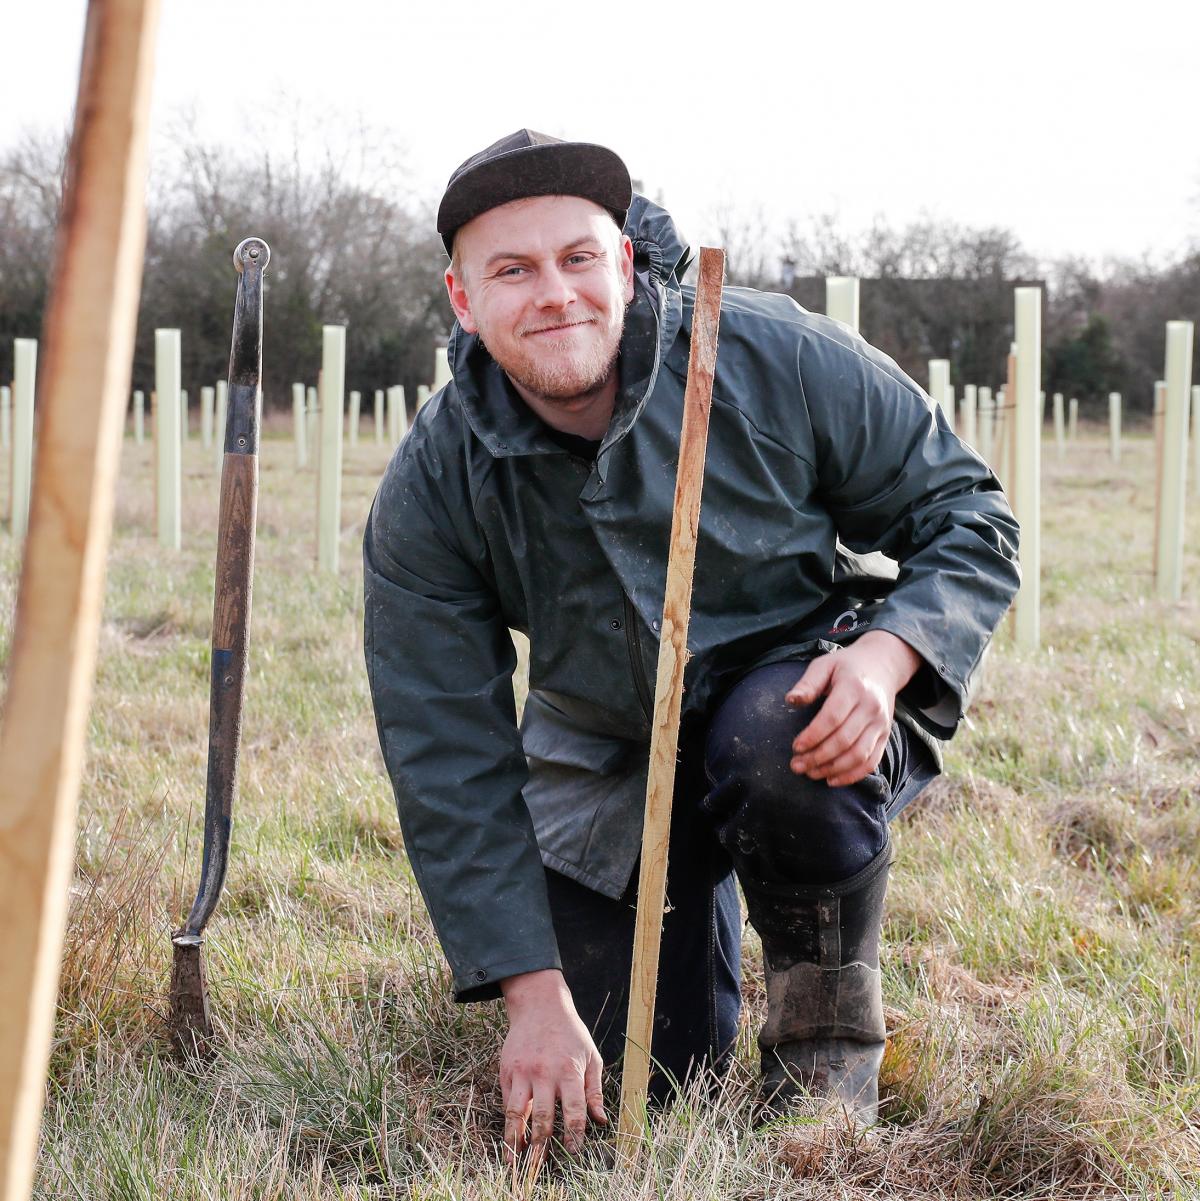 Senior Forest Ranger James crouching down smiling at the camera while tree planting